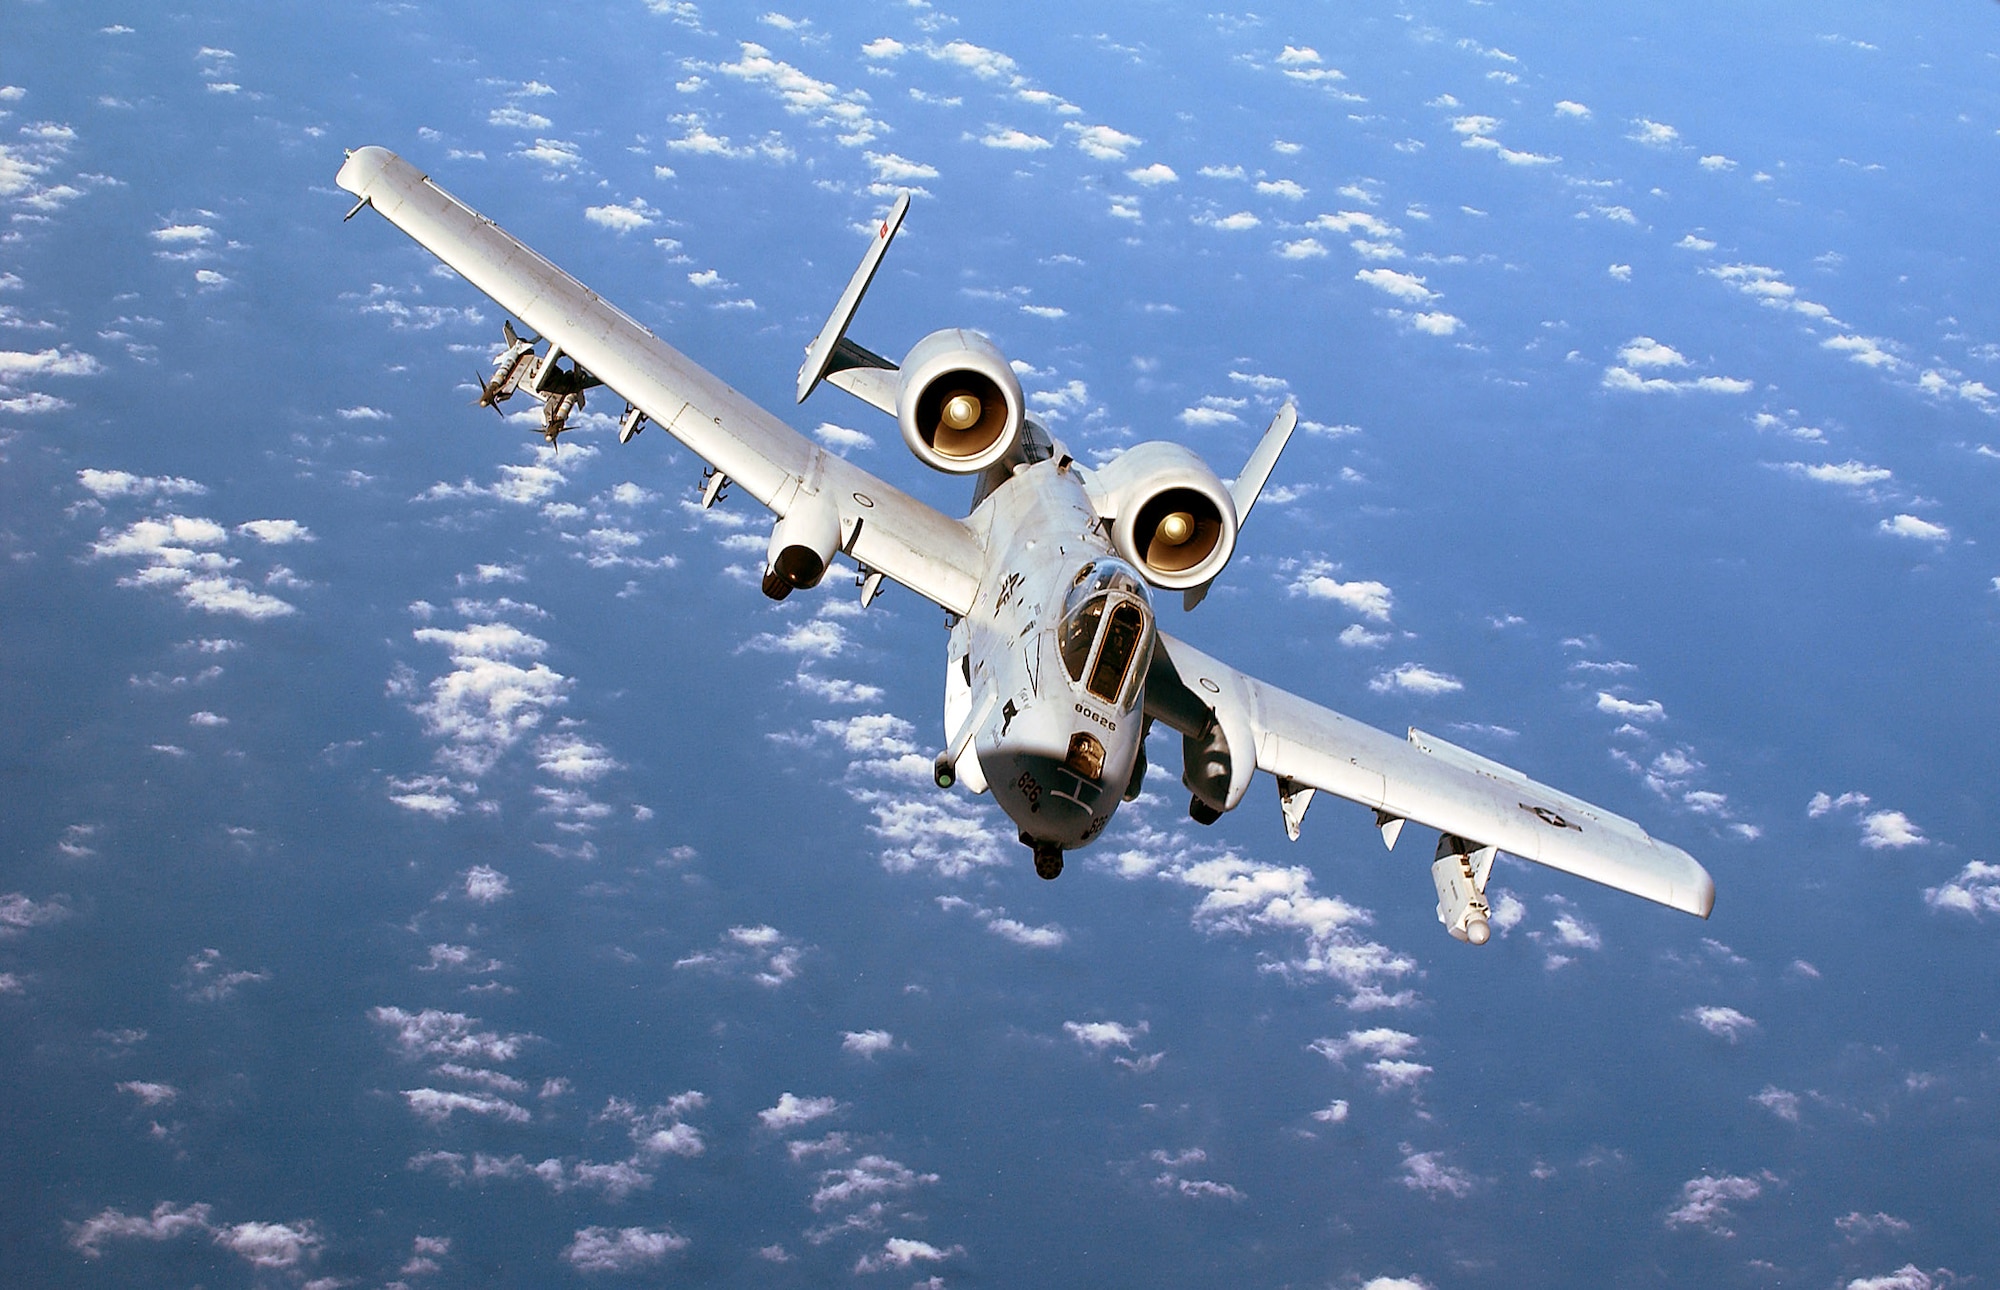 OVER THE MEDITERRANEAN SEA -- An A-10 Thunderbolt II from the 104th Fighter Wing, Barnes Municipal Airport, Westfield Mass., Massachusetts Air National Guard, banks while flying accross the Mediterranean Sea enroute to a forward operating base.  (U.S. Air Force photo by Master Sgt. Mark Bucher)